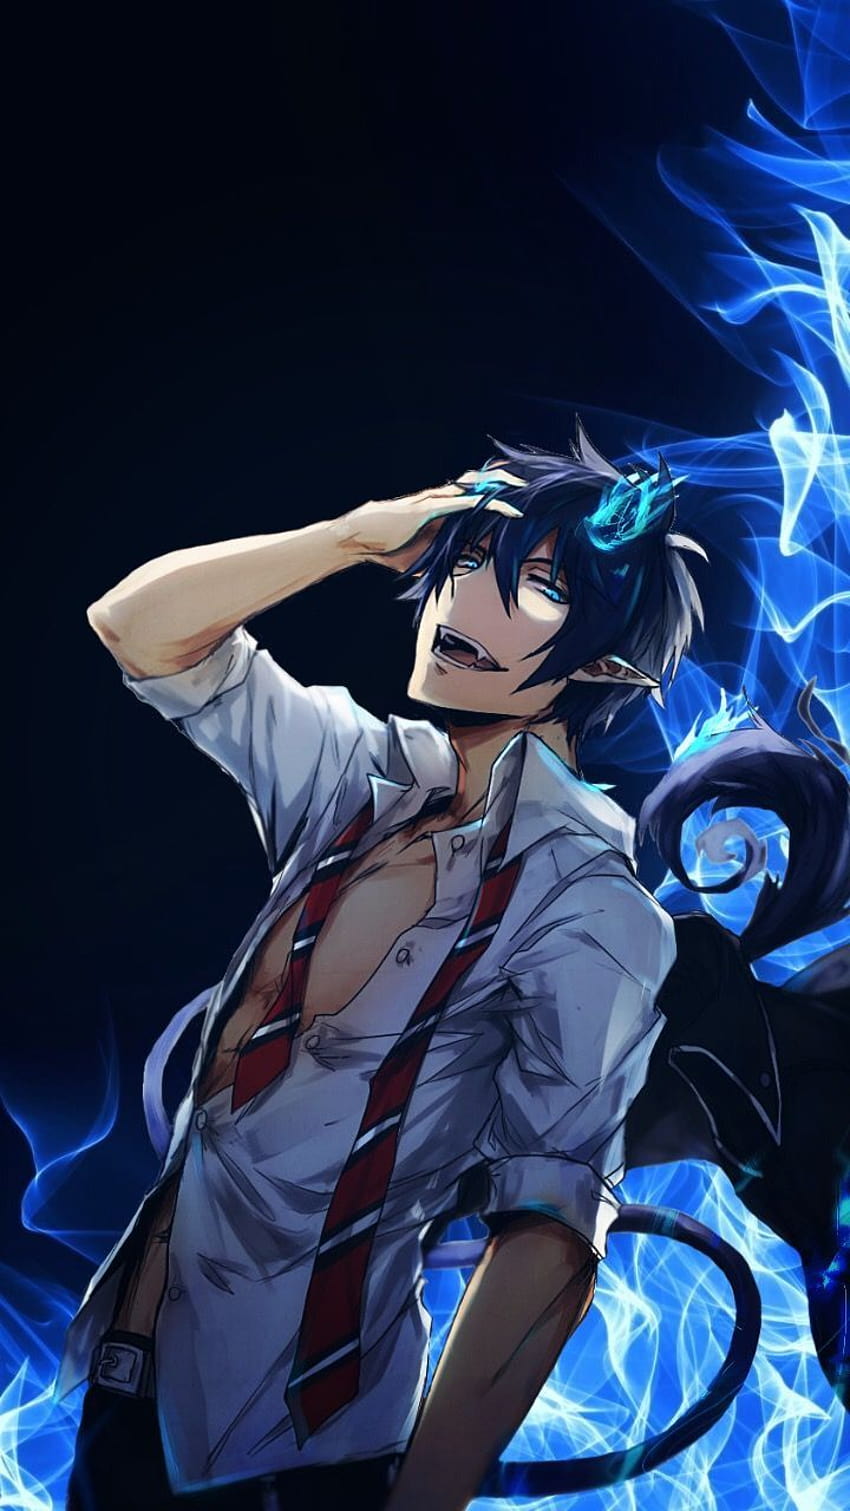 Blue Exorcist Season 3 Release Date Still Chance to Happen  Whenwill